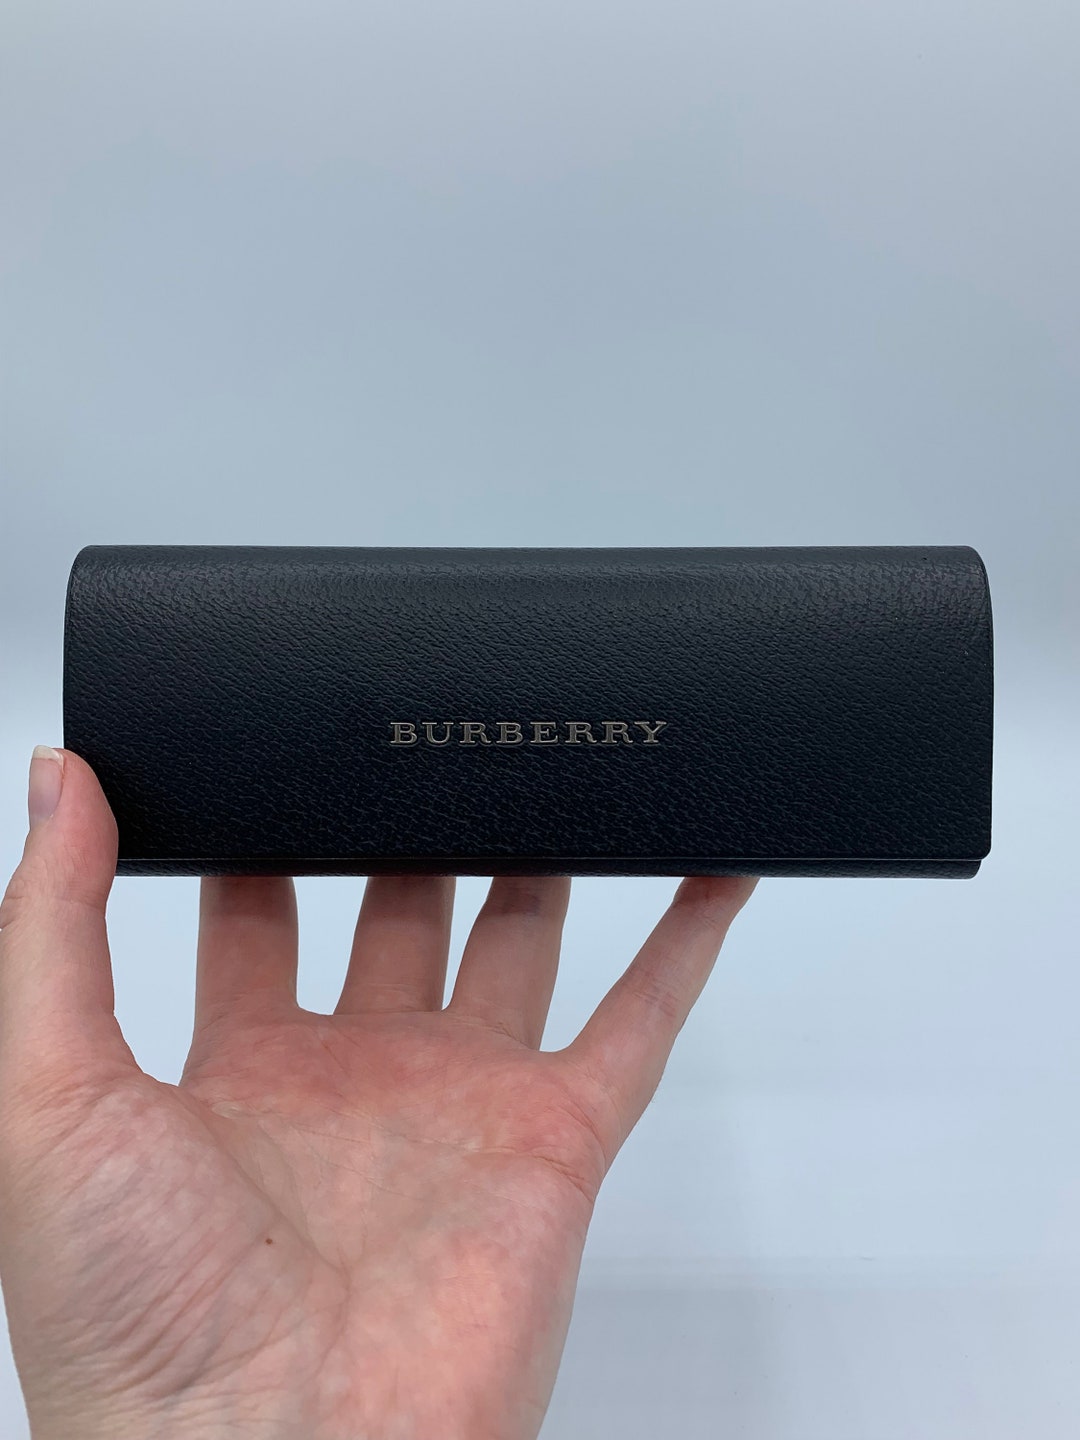 BURBERRY Authentic Glasses Case Hard Black Case With Soft - Etsy